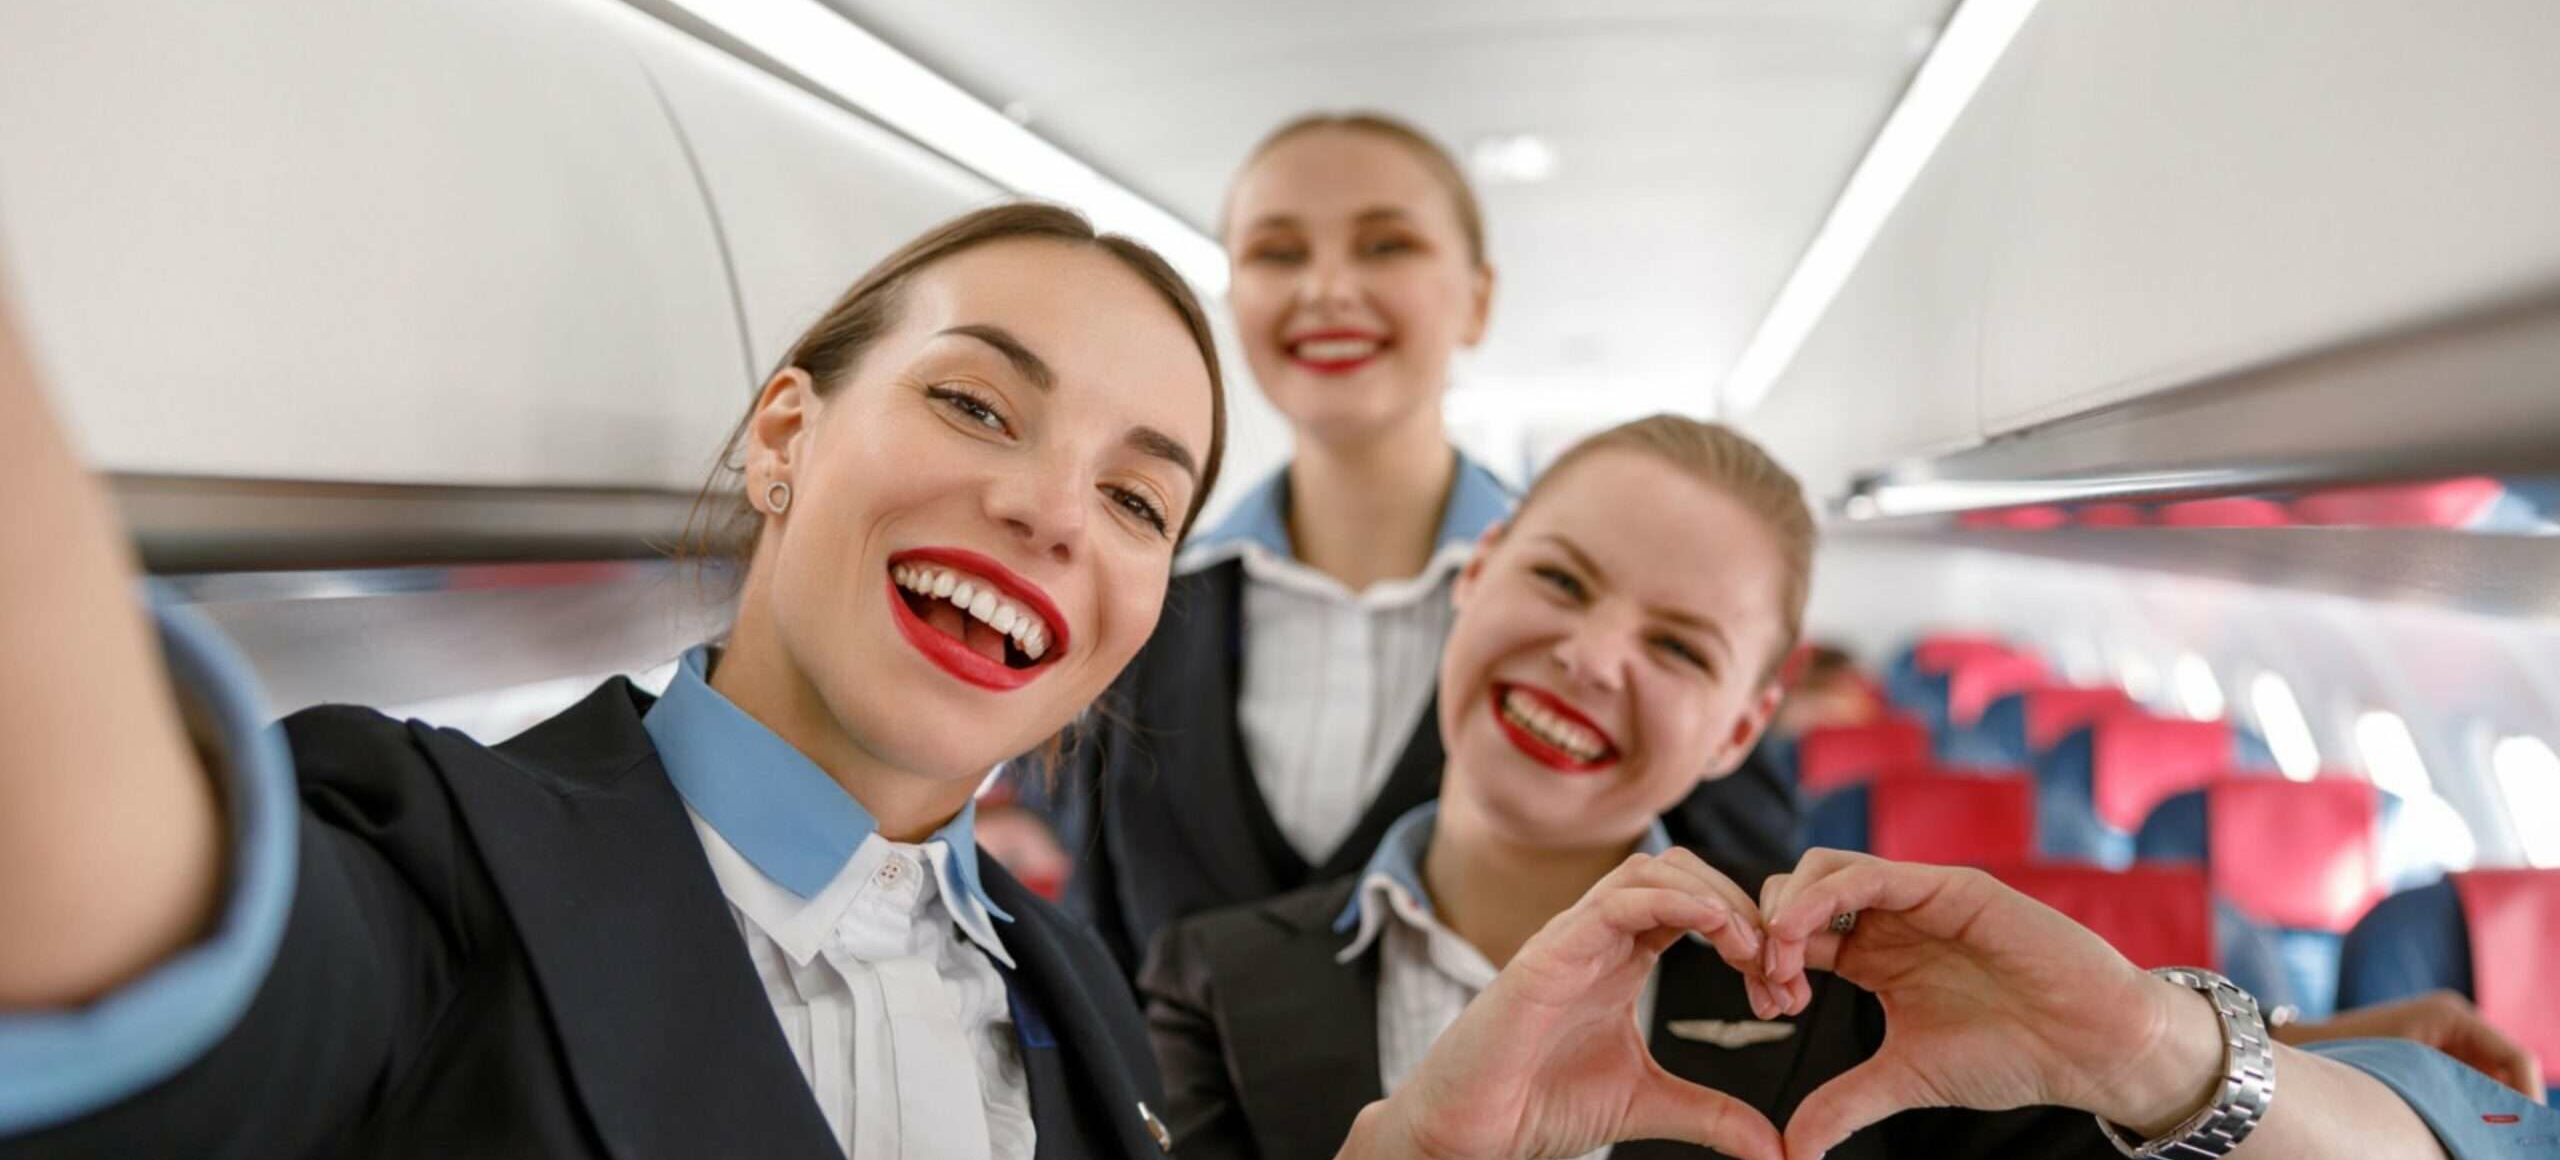 The Vital Role of Safety and Security in Cabin Crew Training